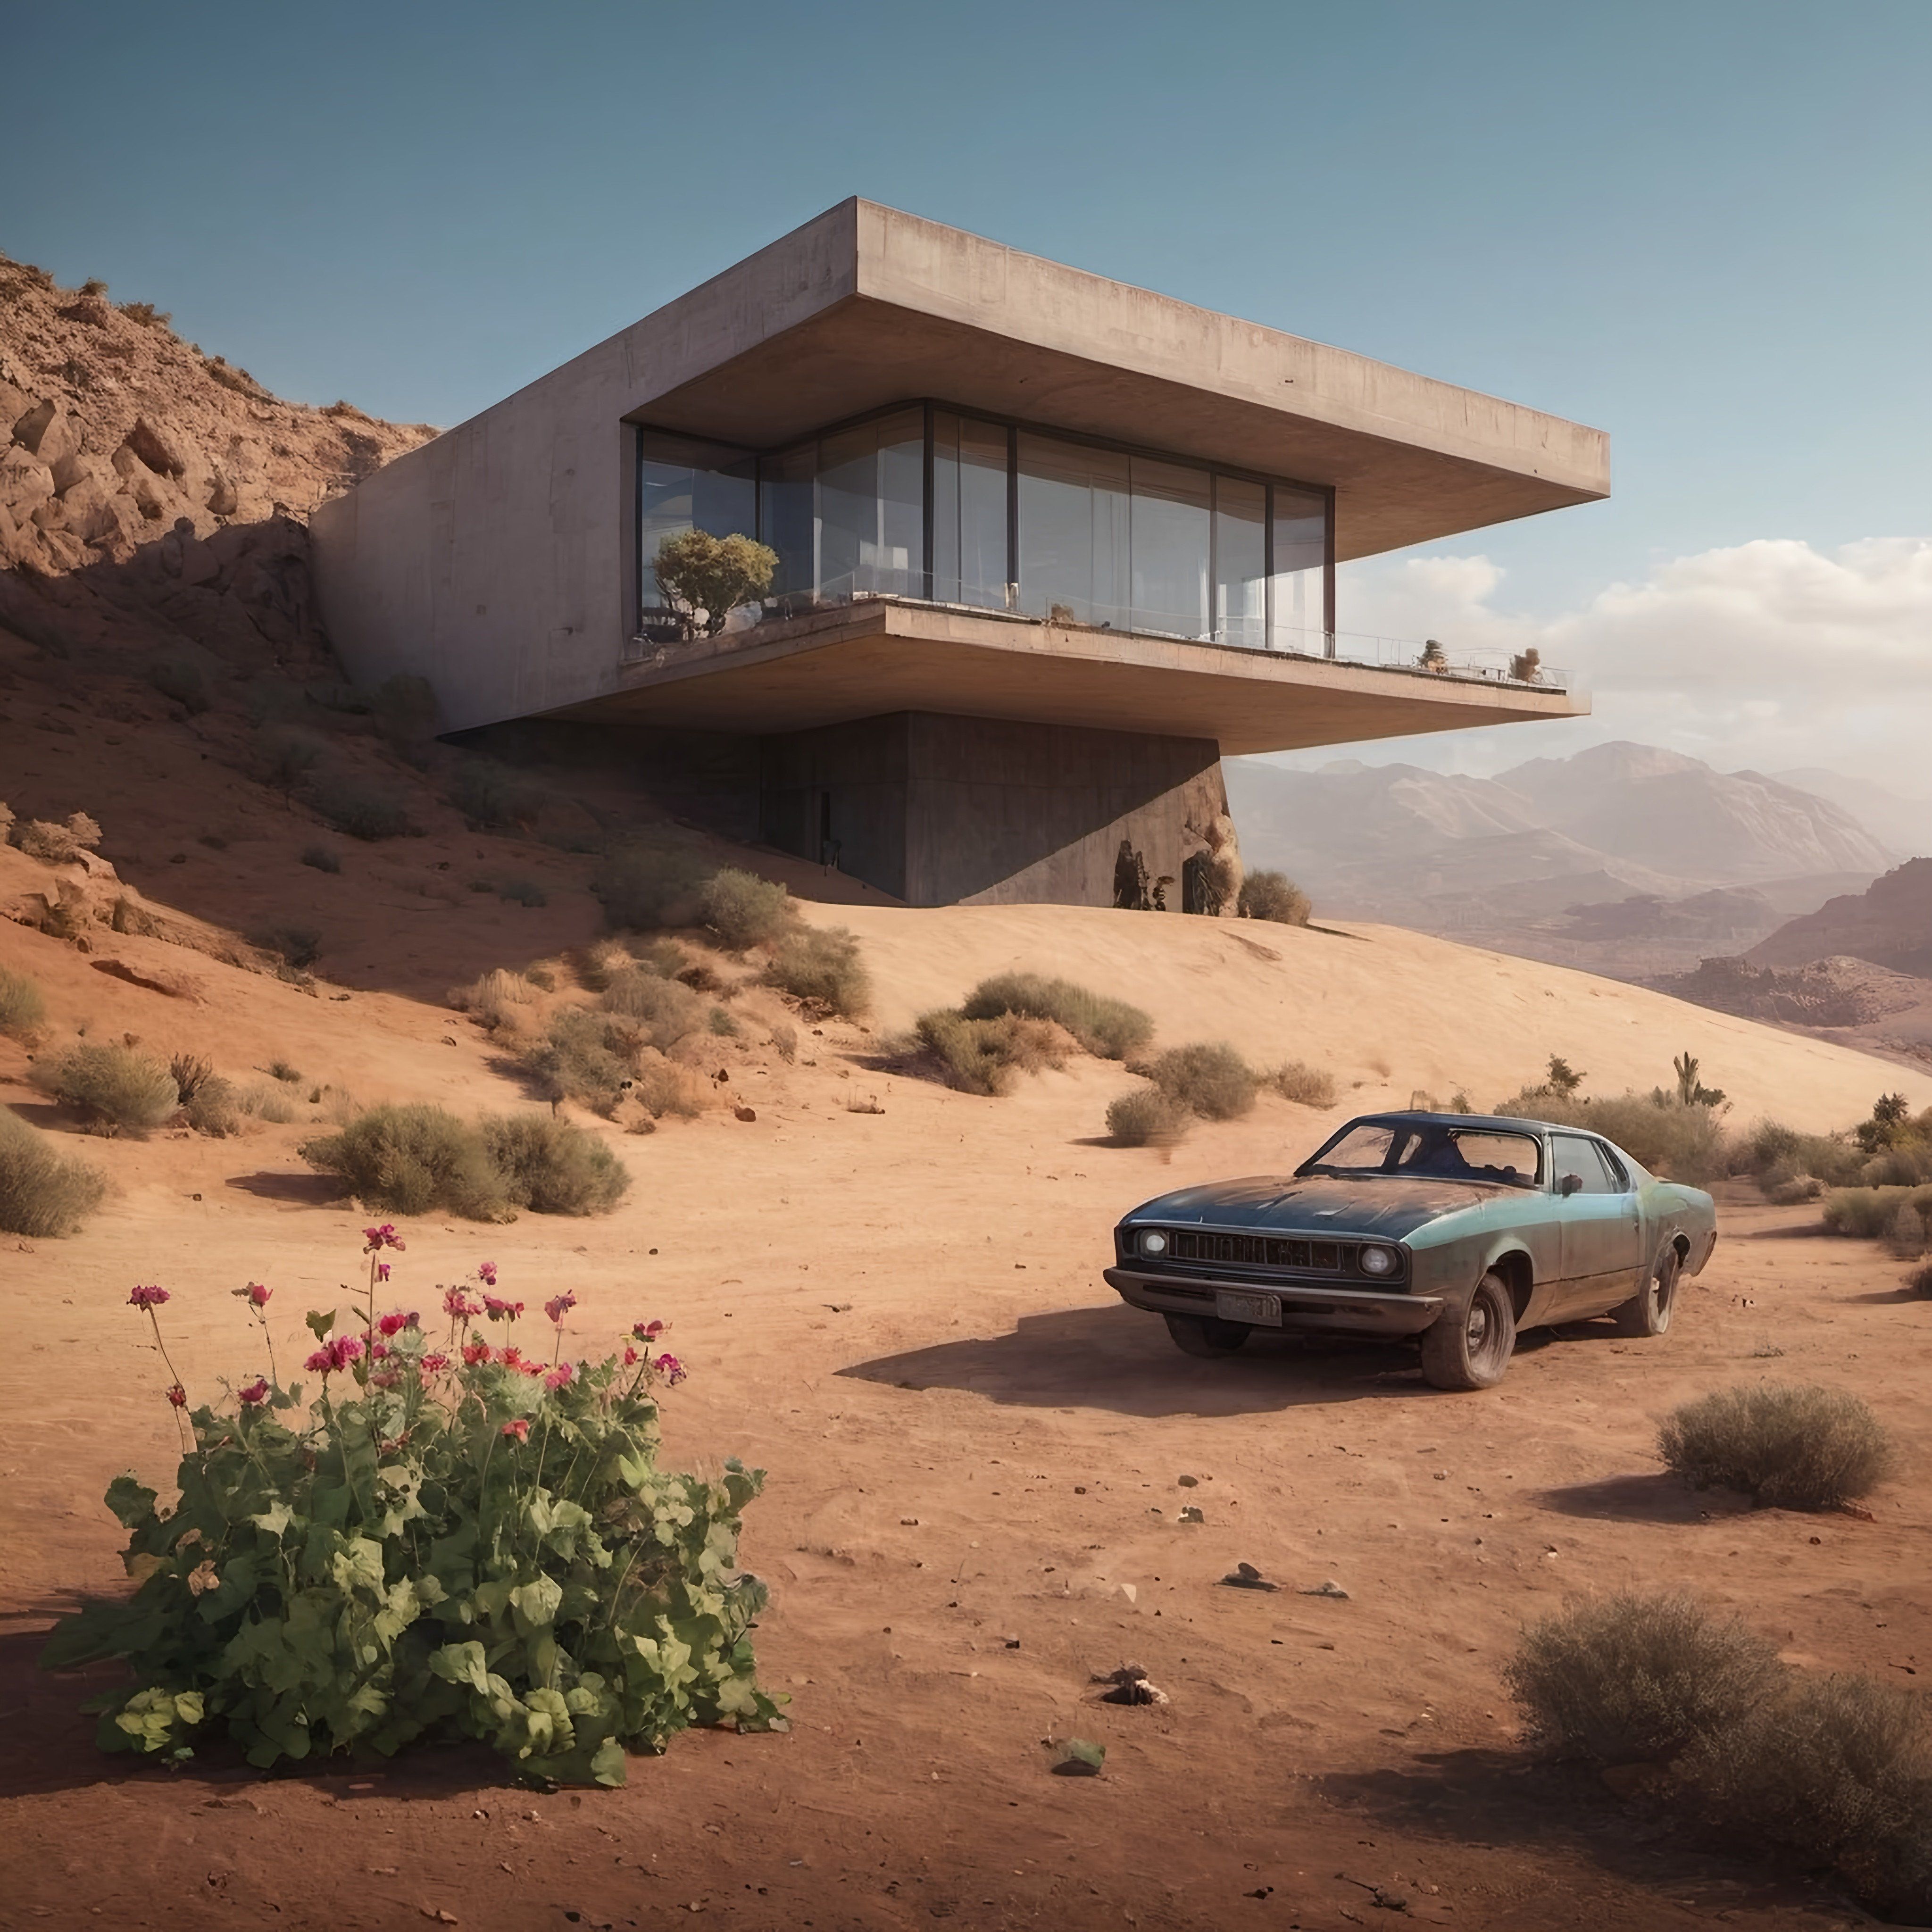 Prompt: a car parked in front of a building on a desert hillside with a plant in the foreground and a desert landscape in the background